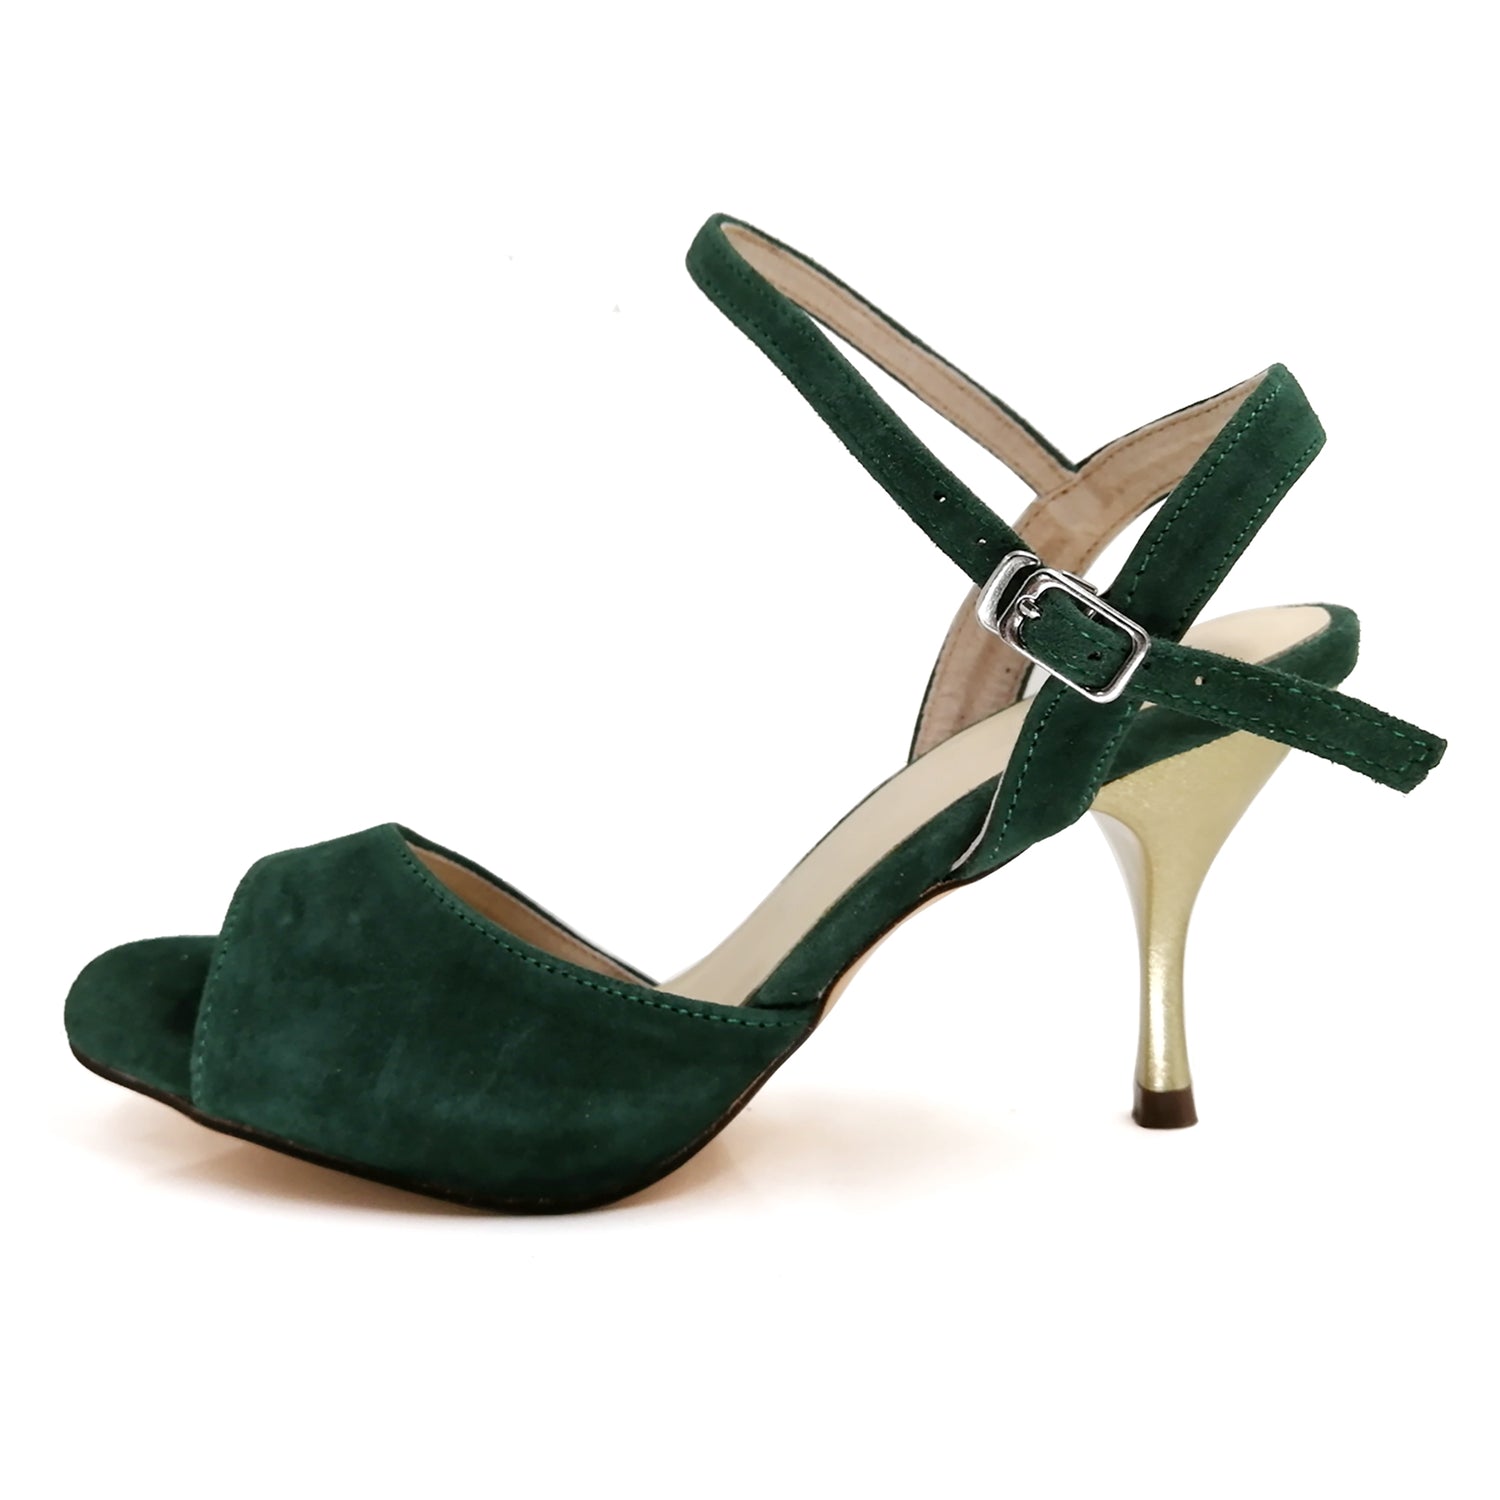 Elegant Pro Dancer Ladies Tango Shoes with High Heel and Leather Sole in Dark Green2